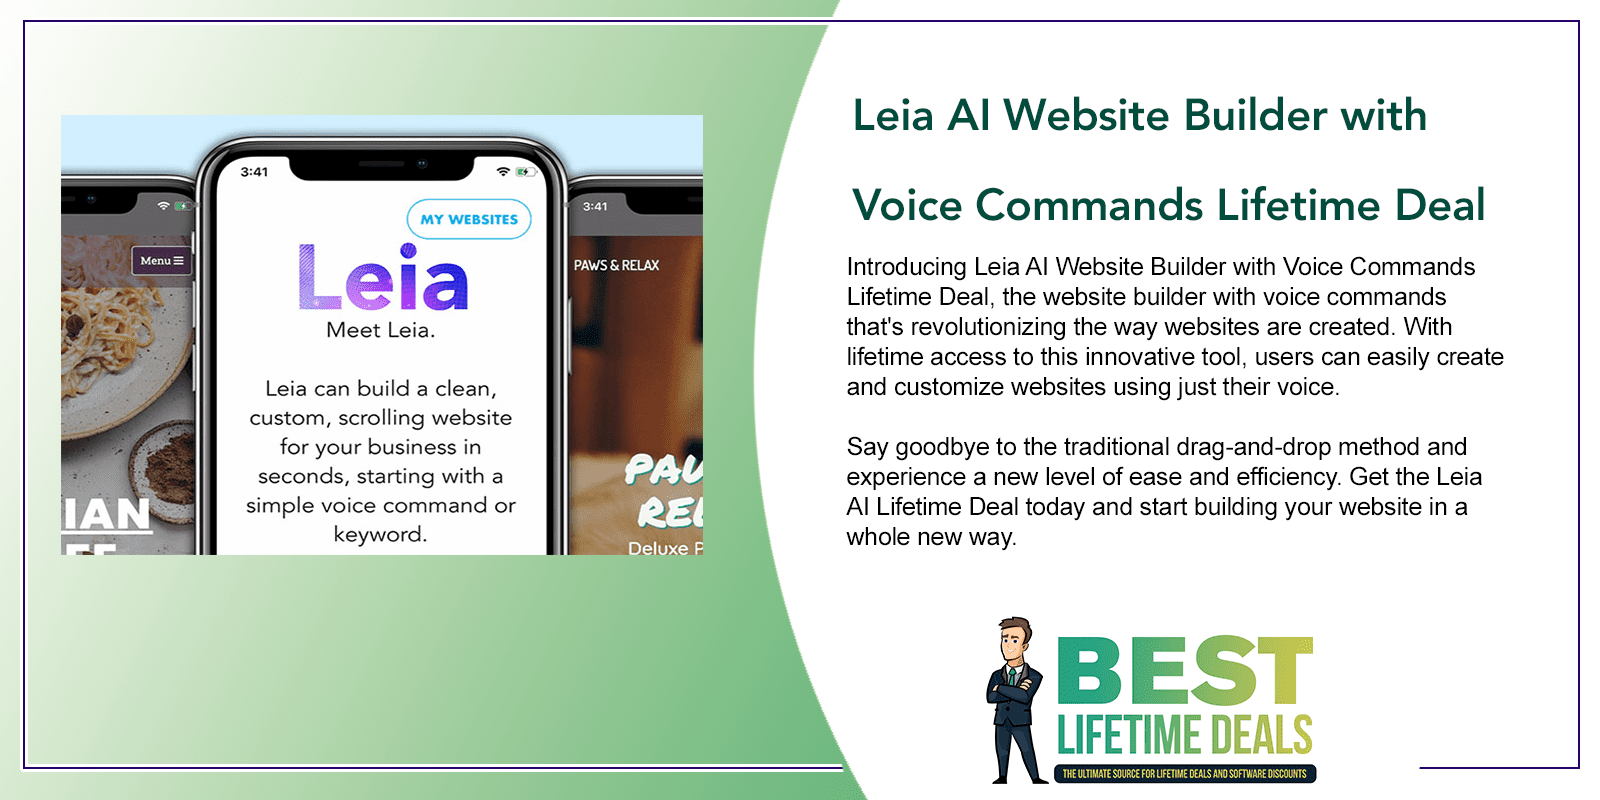 Leia AI Website Builder with Voice Commands Lifetime Deal Featured Image